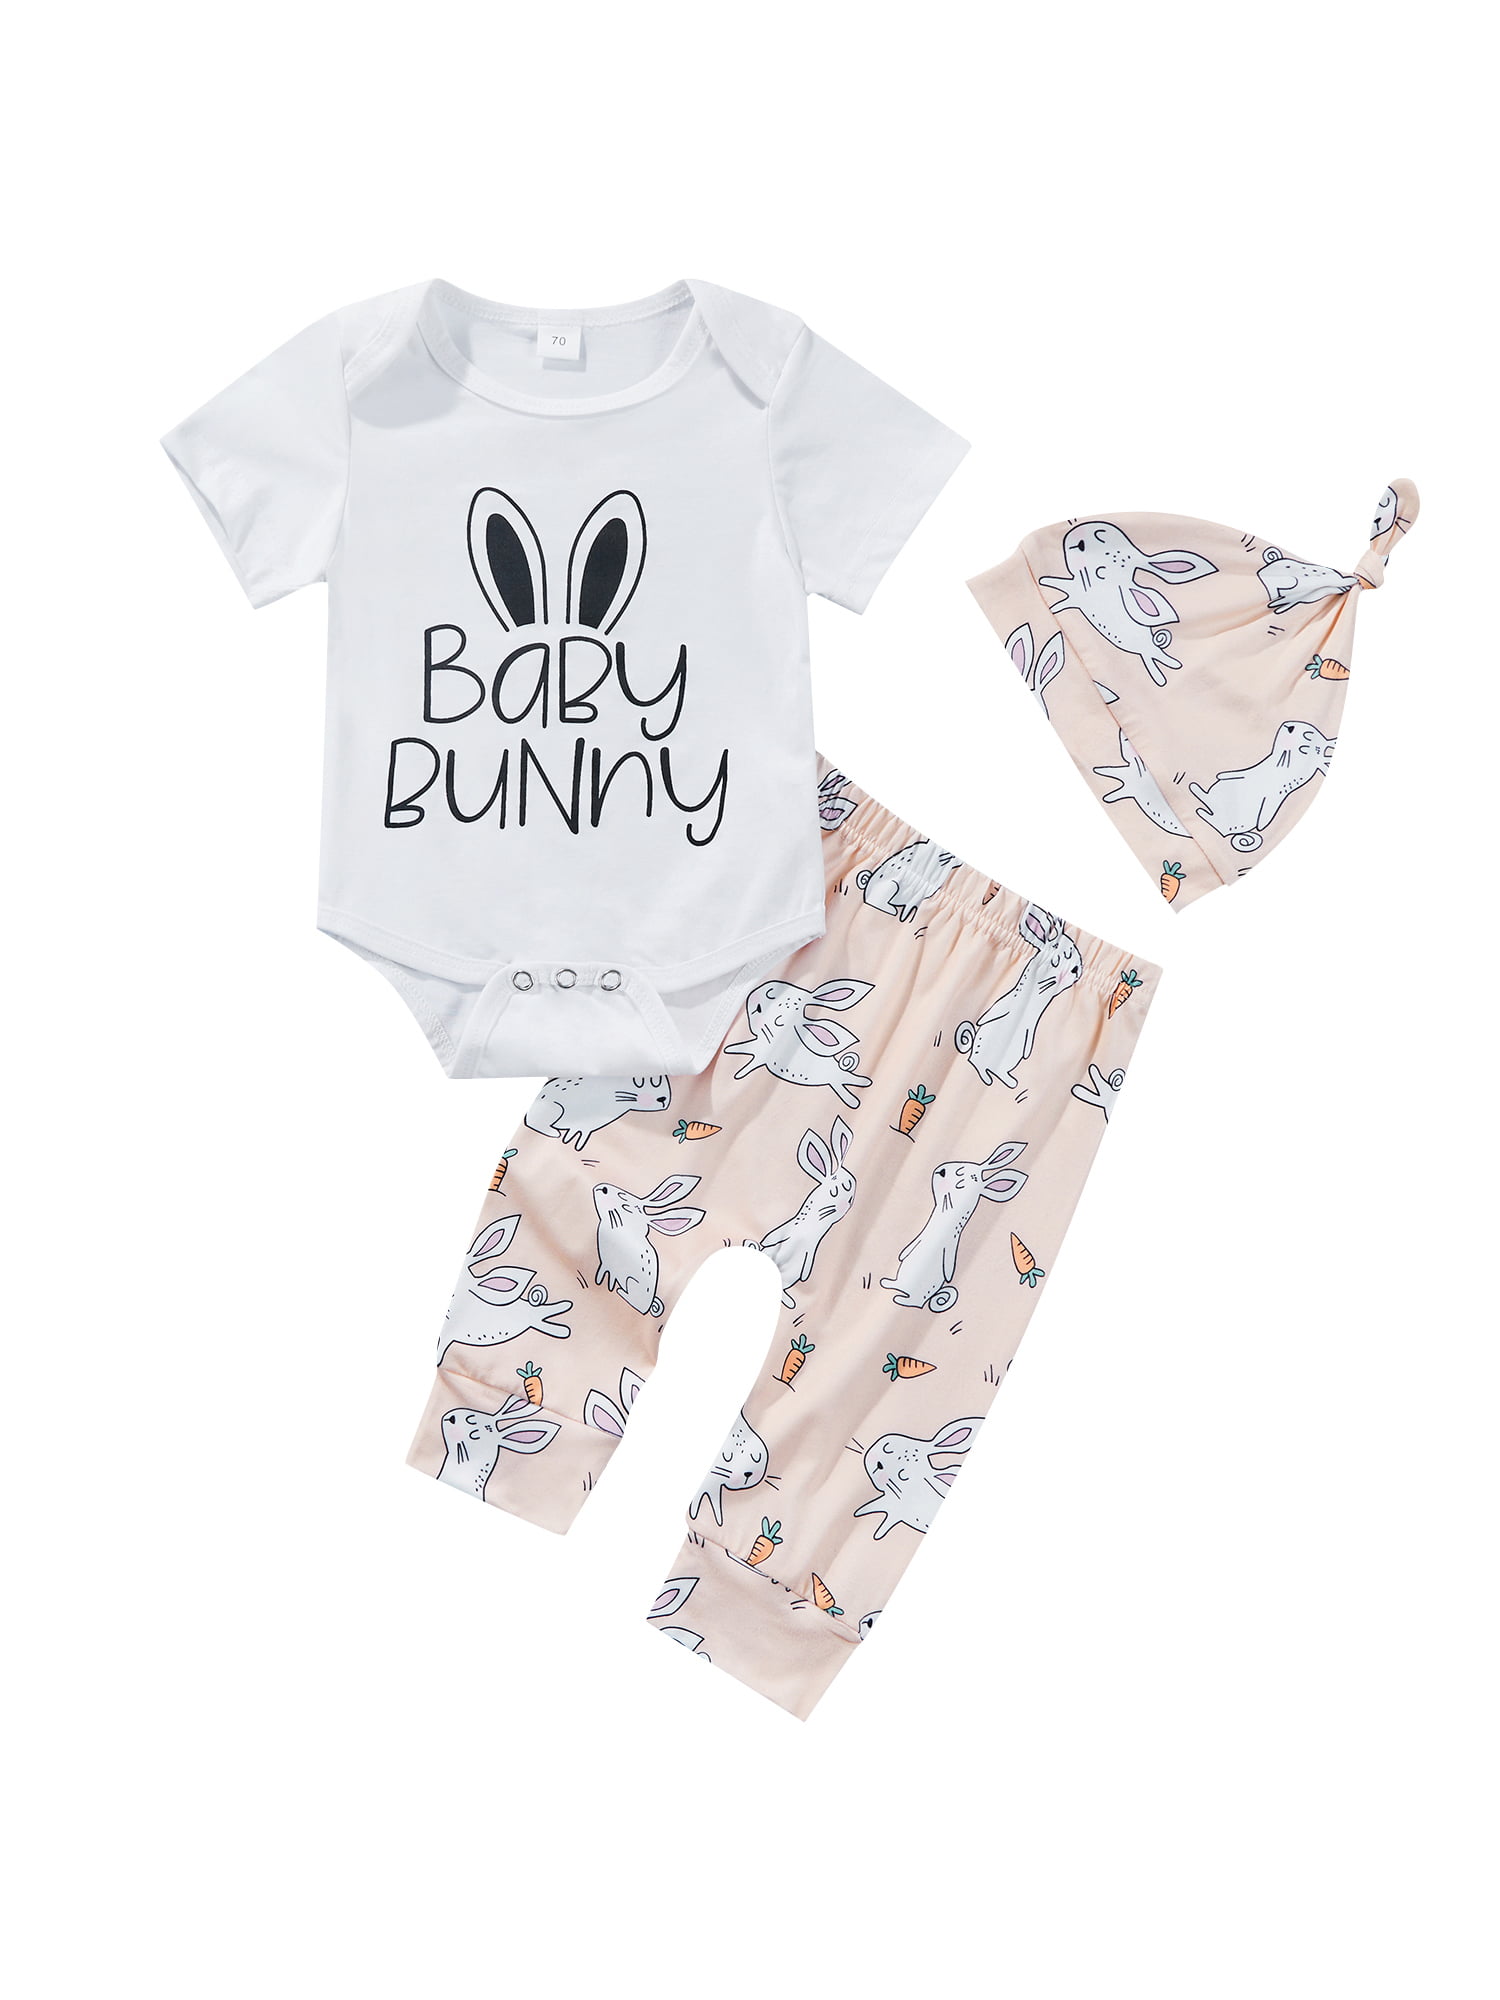 Easter Infant Kids Baby Girls Boys Cartoon Letter Print T Shirt Pant 2PC Outfits 